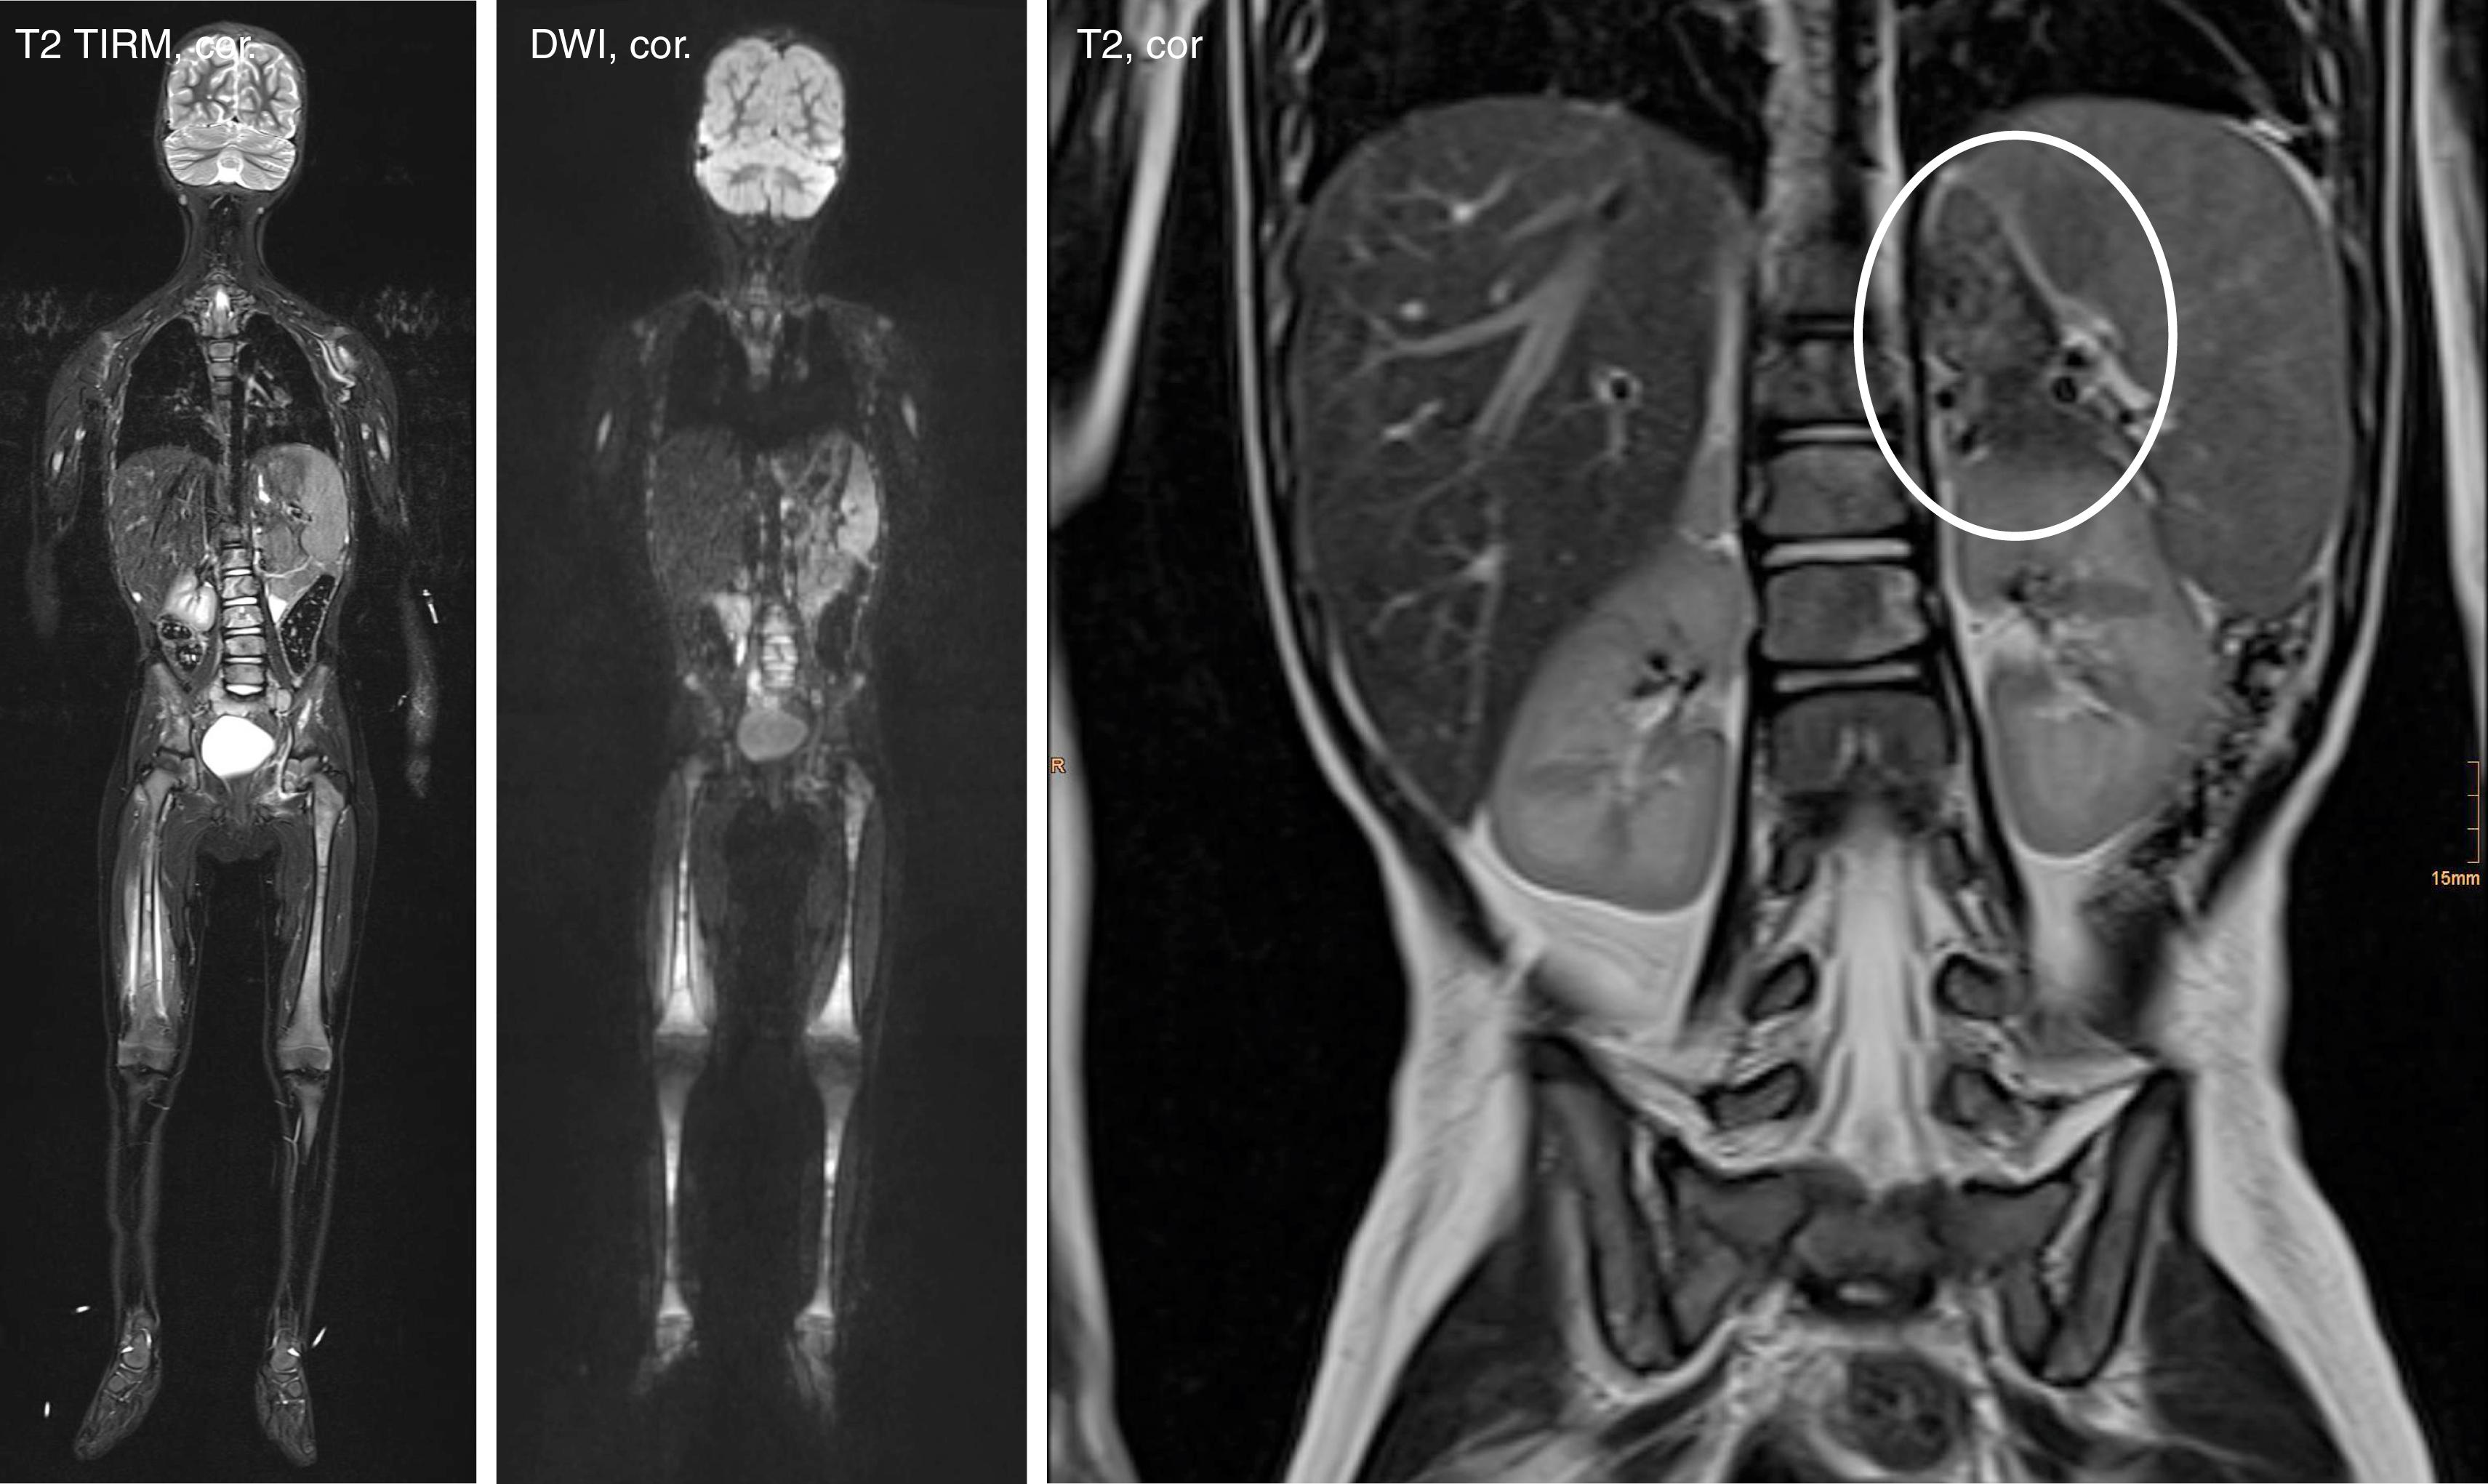 Fig. 40.2, Neuroblastoma with bone marrow infiltration mimicking chronic nonbacterial osteomyelitis (CNO)/chronic recurrent multifocal osteomyelitis (CRMO) in a 2-year-old girl. Whole-body magnetic resonance imaging (MRI) imaging was performed for chronic bone pain and delivered results suggestive of CNO/CRMO. Turbo Inversion Recovery Measurement (TIRM) sequences ( left ) and diffusion-weighted imaging (DWI) ( middle ) show signal alterations over long bones of the lower extremities. Bone biopsy shows bone marrow infiltration of neuroblastoma cells. Local MRI (T2) of adrenal glands shows the primary tumor ( right ).